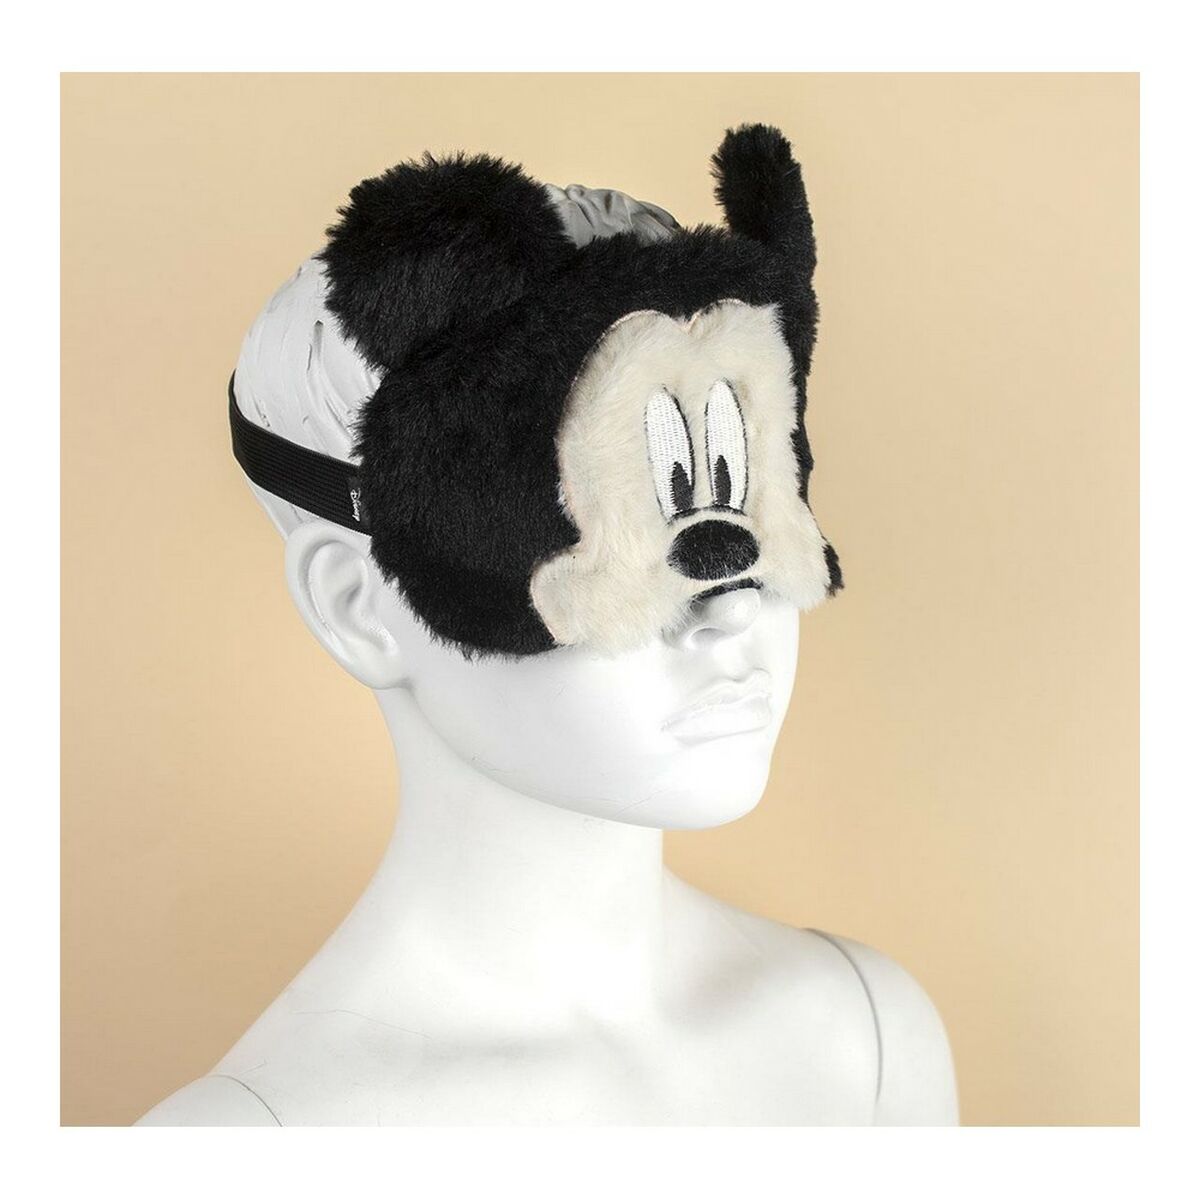 Blindfold Mickey Mouse black (20 x 10 x 1 cm) - Little Baby Shop